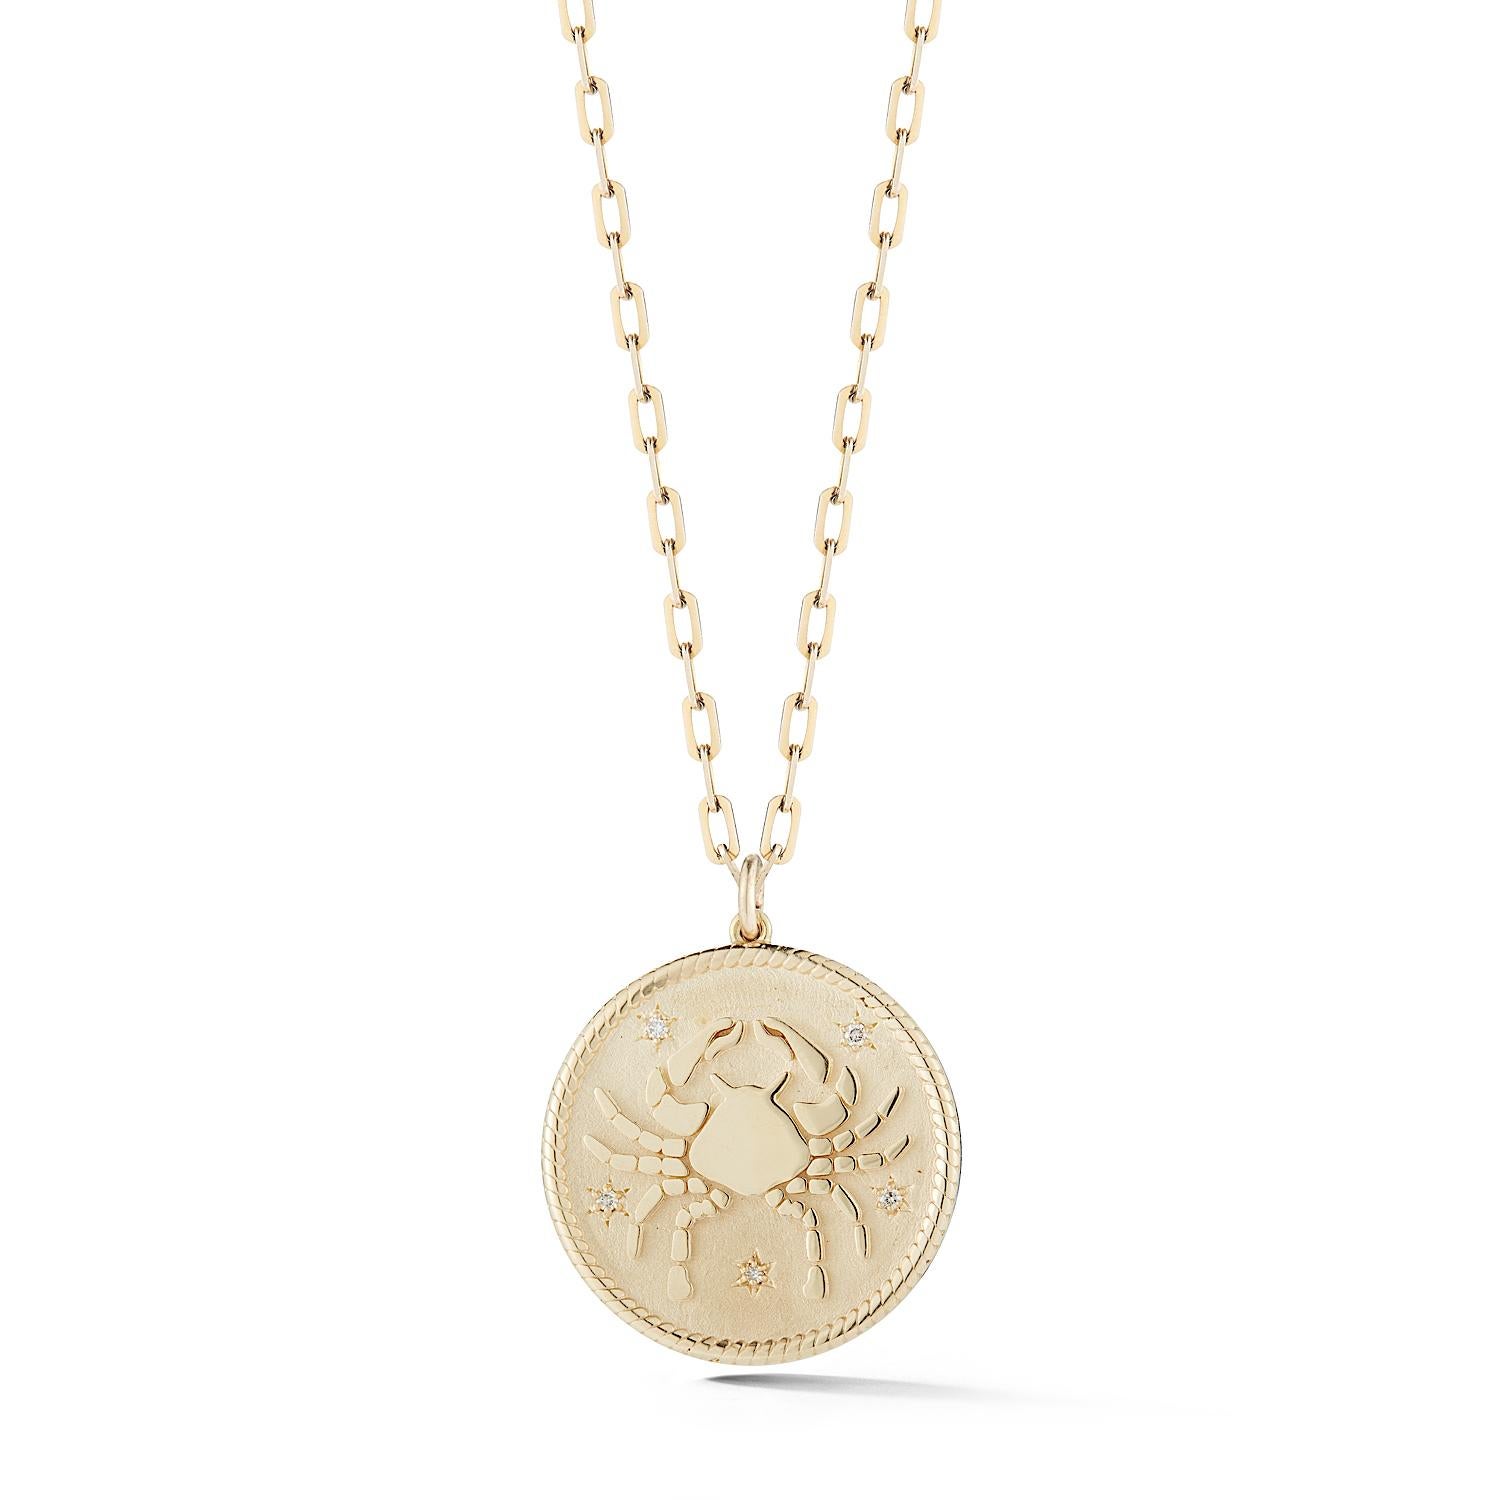 Garland Collection Diamond and Gold Capricorn Zodiac Medallion For Sale 10